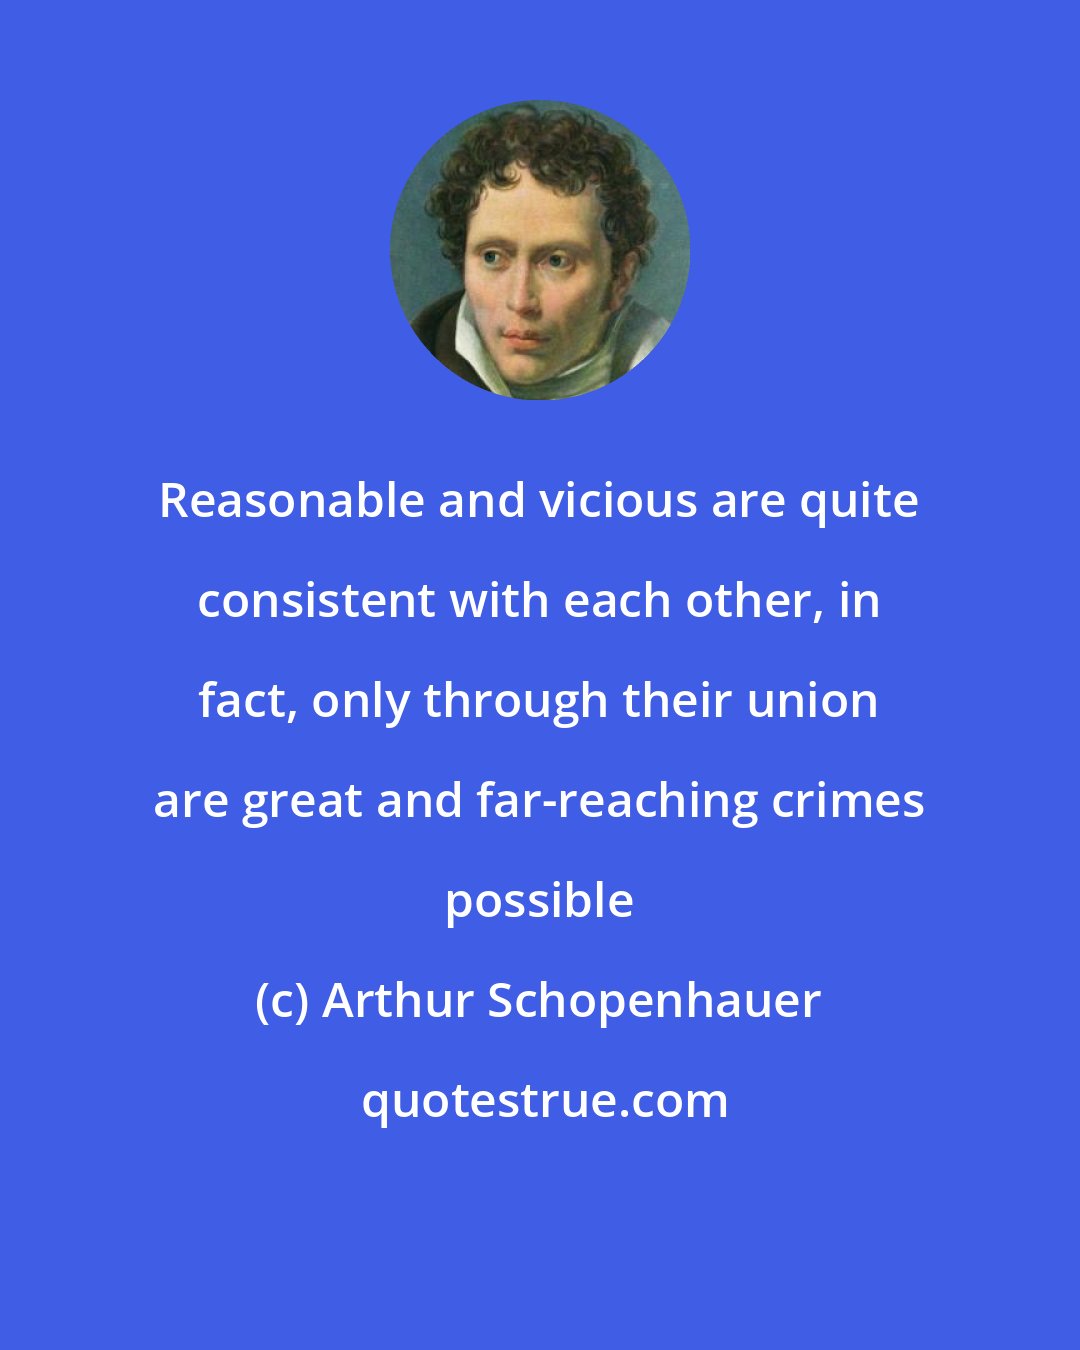 Arthur Schopenhauer: Reasonable and vicious are quite consistent with each other, in fact, only through their union are great and far-reaching crimes possible